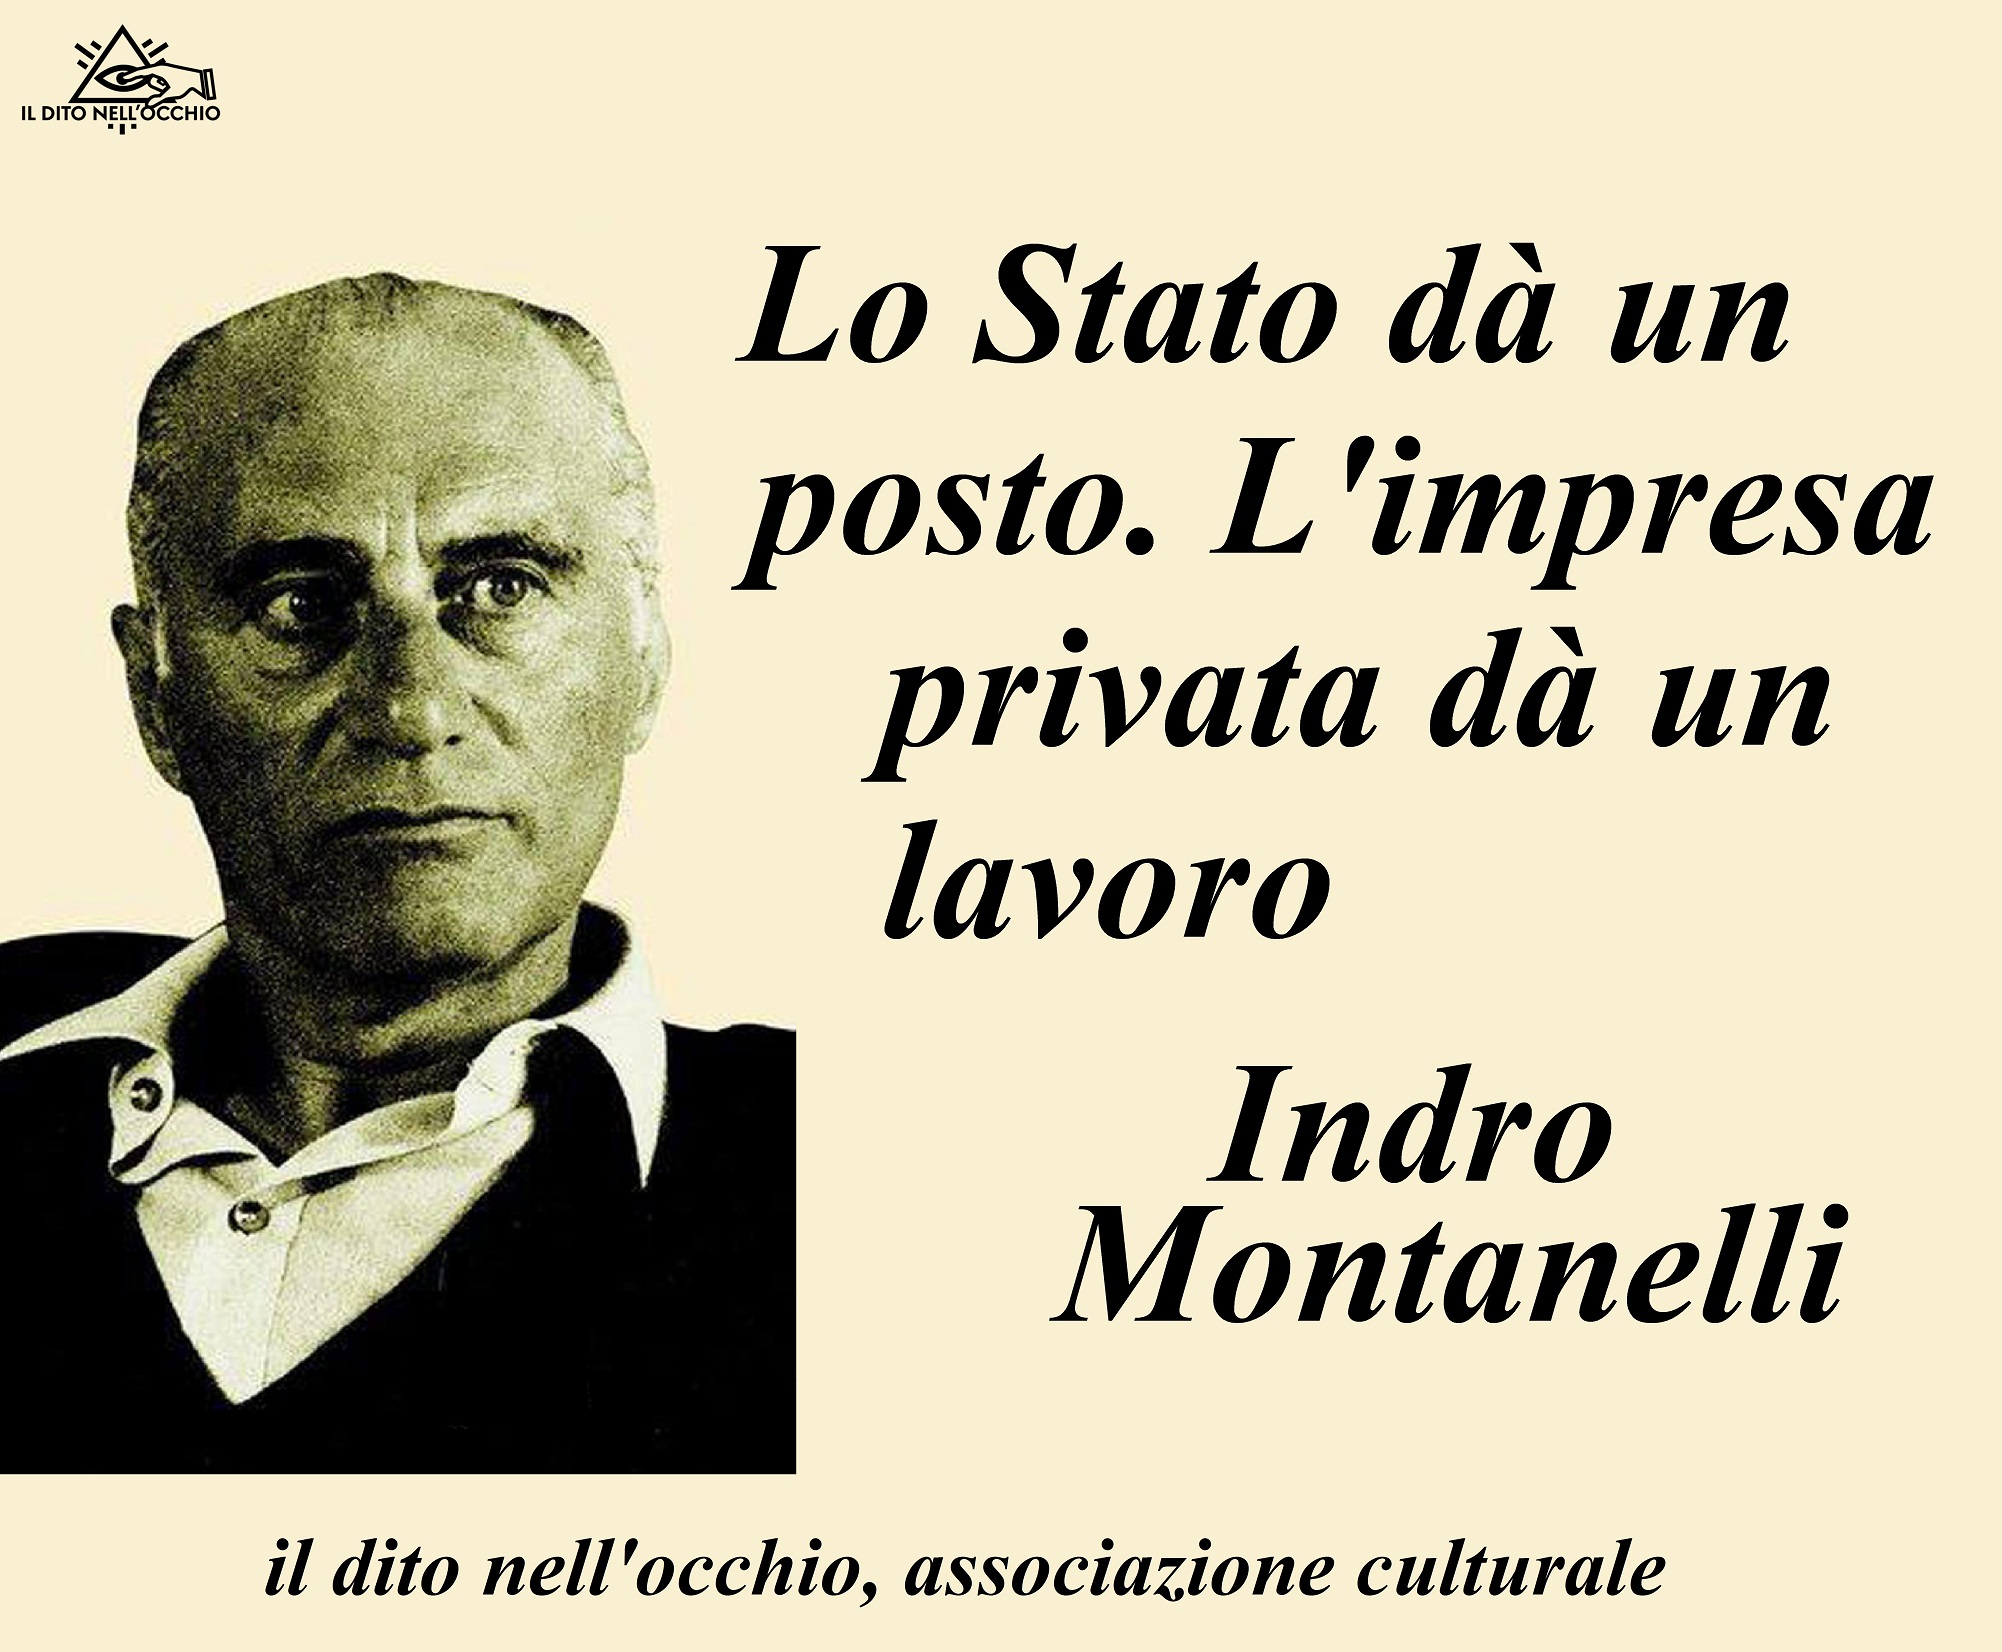 Indro Montanelli